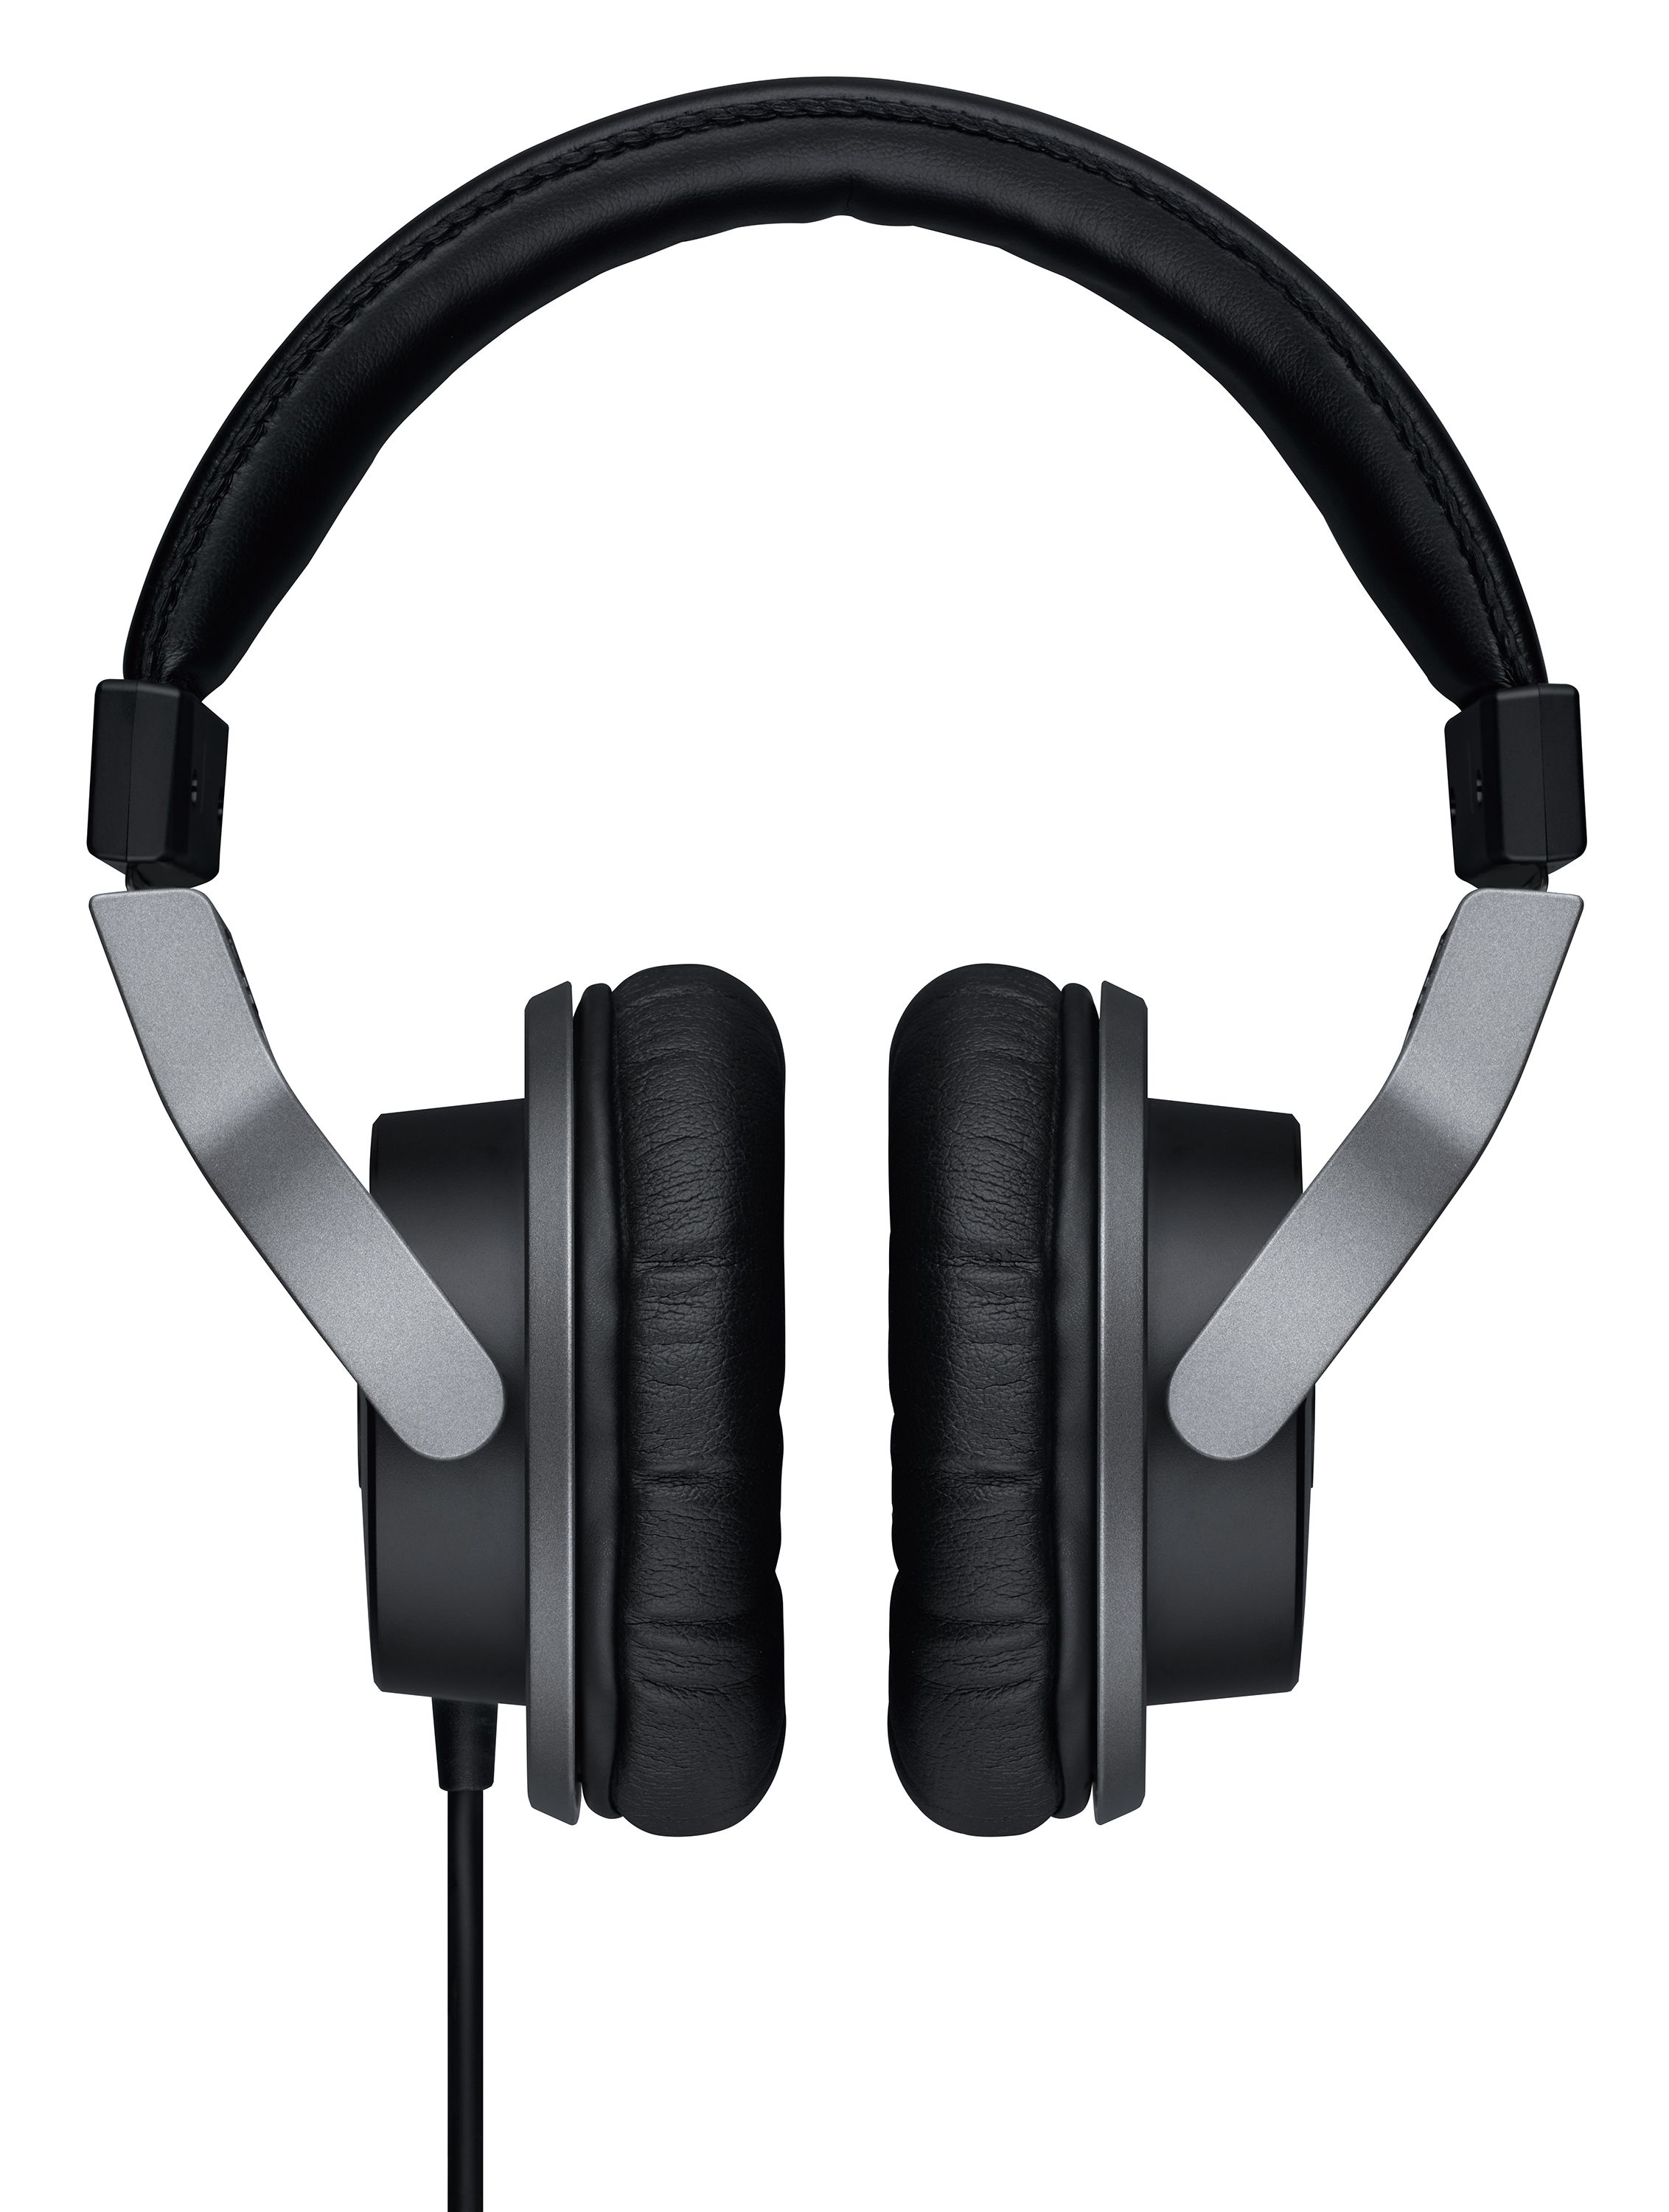 HPH-MT7 - Features - Headphones - Professional Audio - Products 